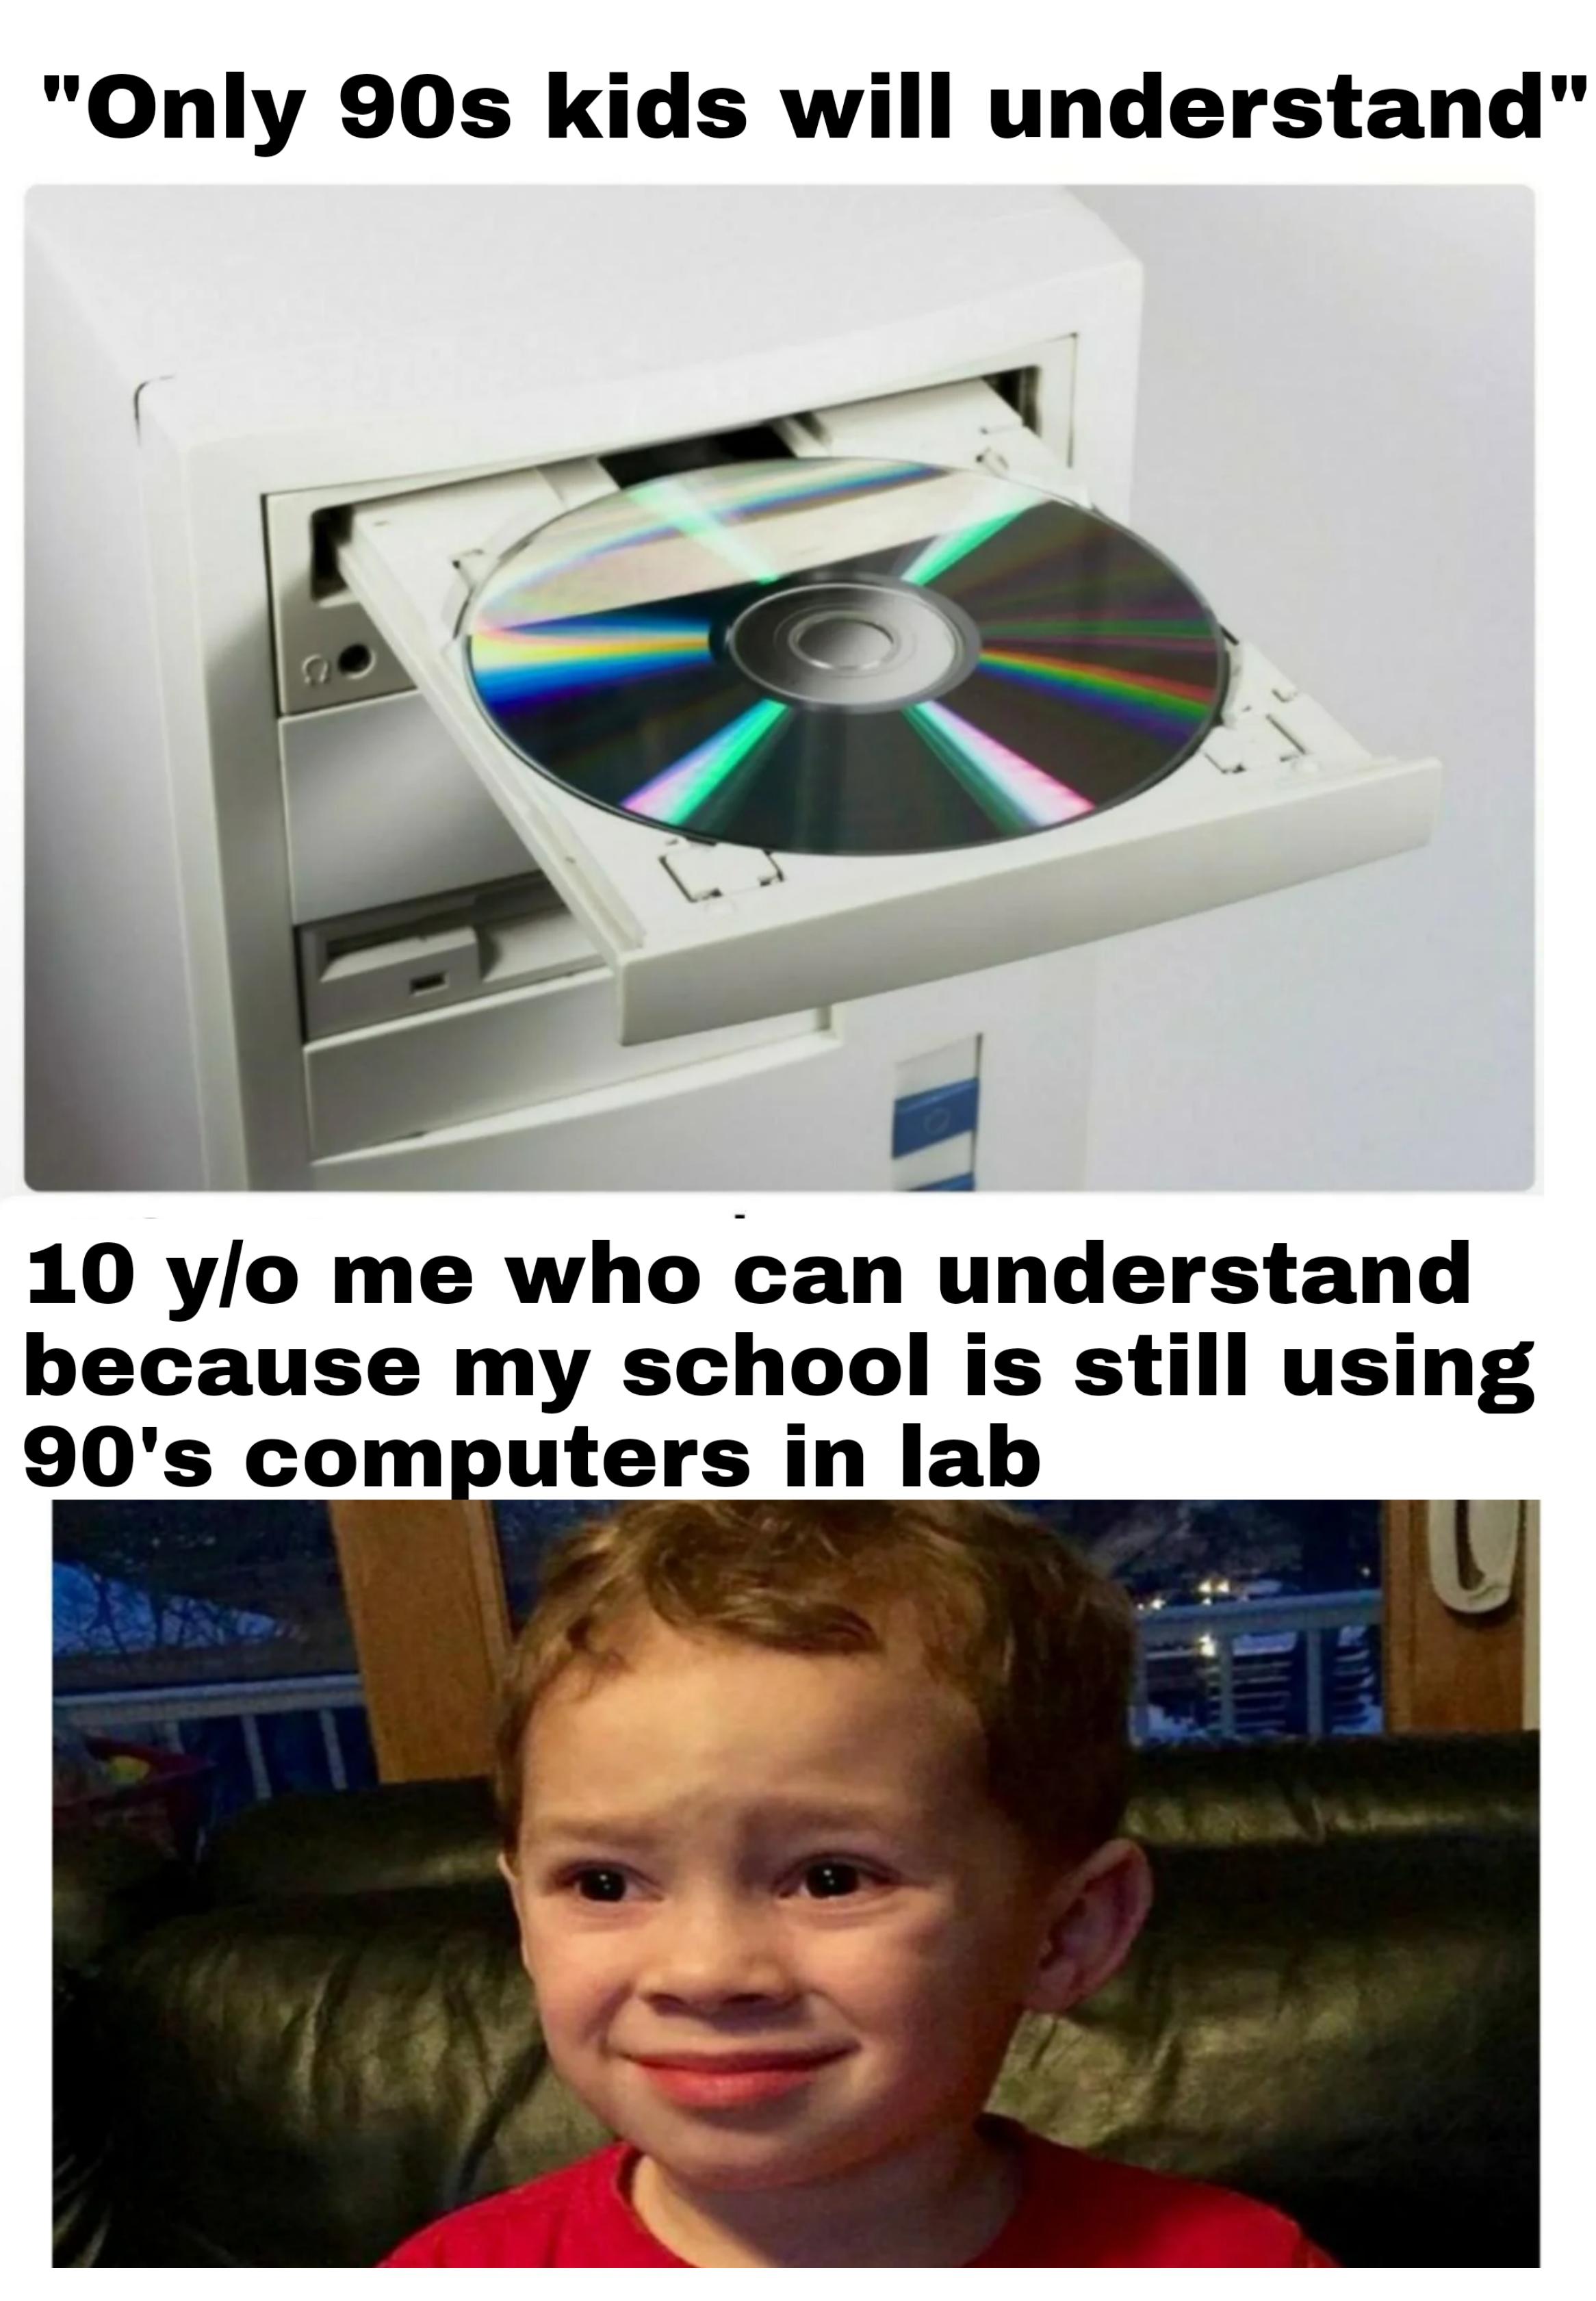 dank memes - funny memes - Compact disc - "Only 90s kids will understand" 10 yo me who can understand because my school is still using 90's computers in lab U